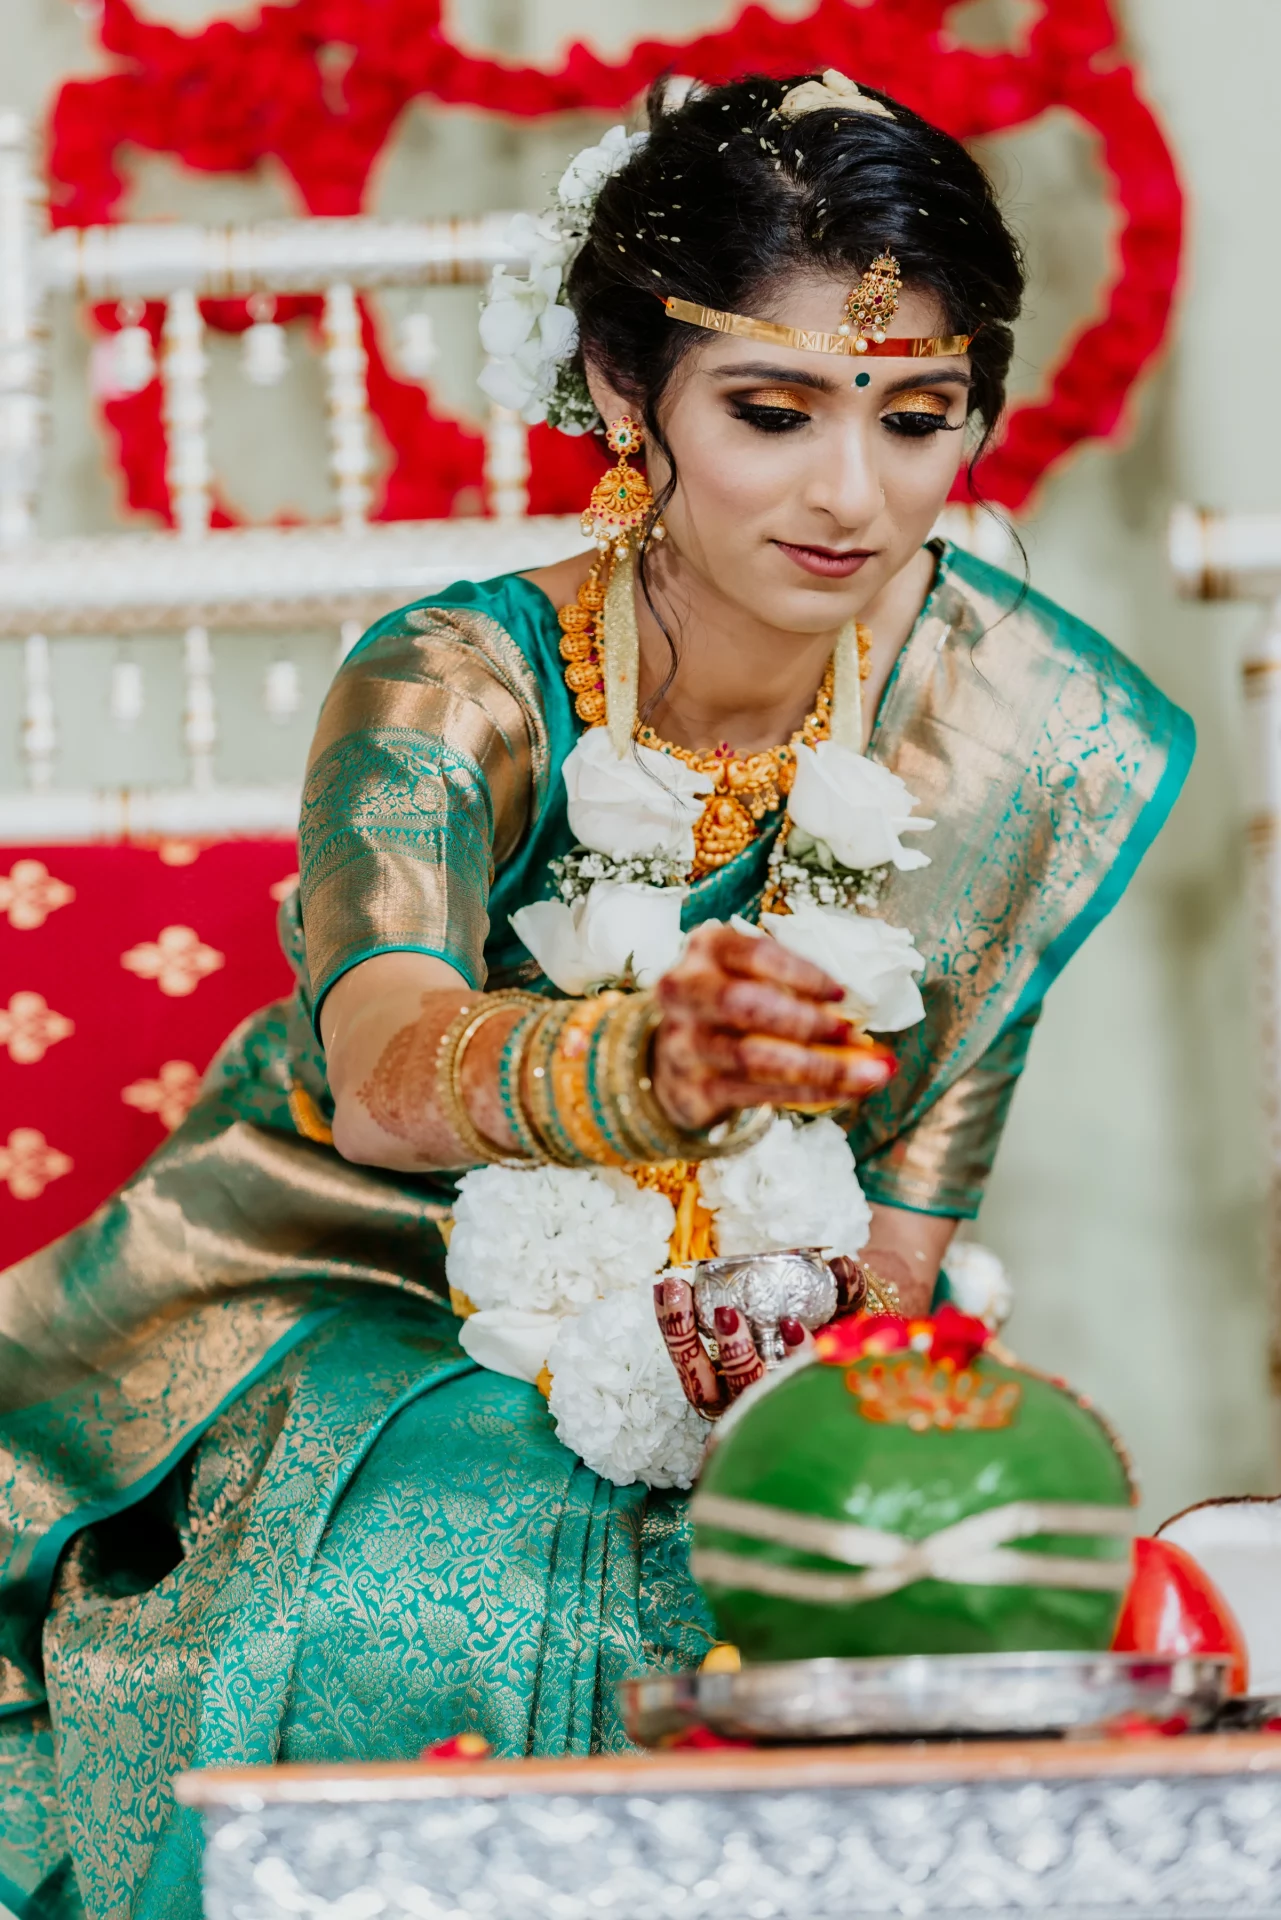 What do South Indian brides wear?